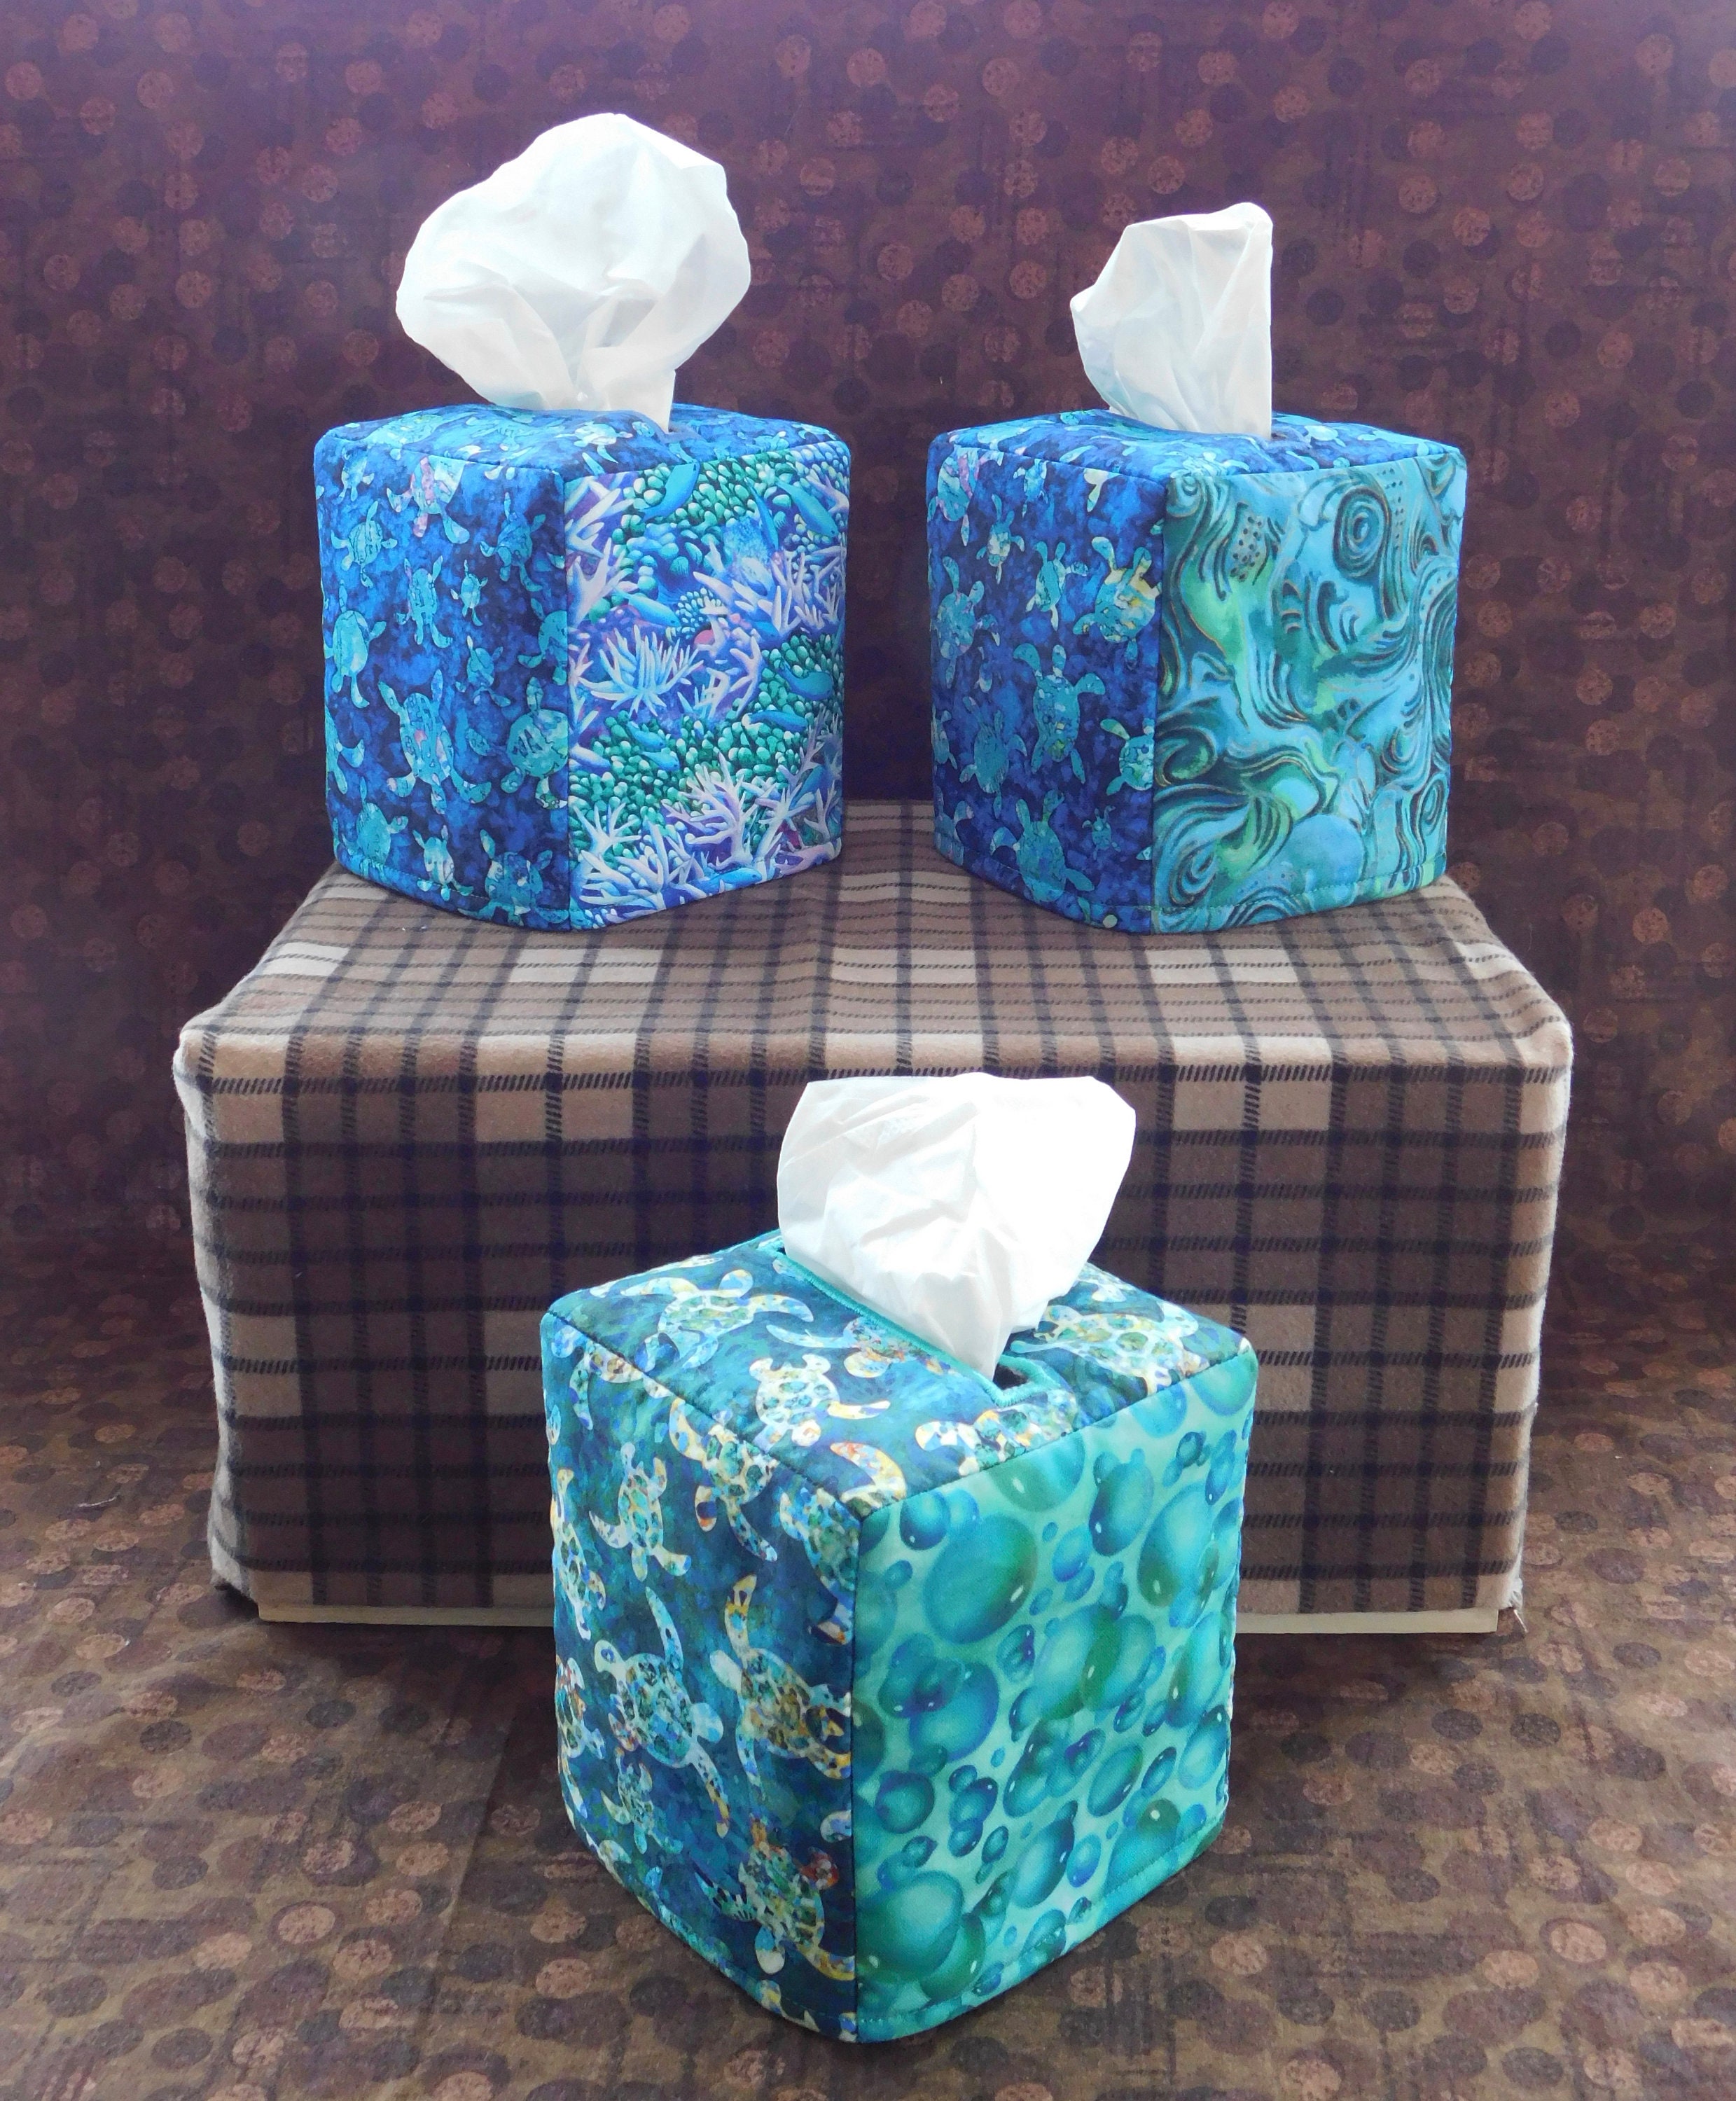 Nora Metal Sprinkle Finish Tissue Box Cover in Turq Colour